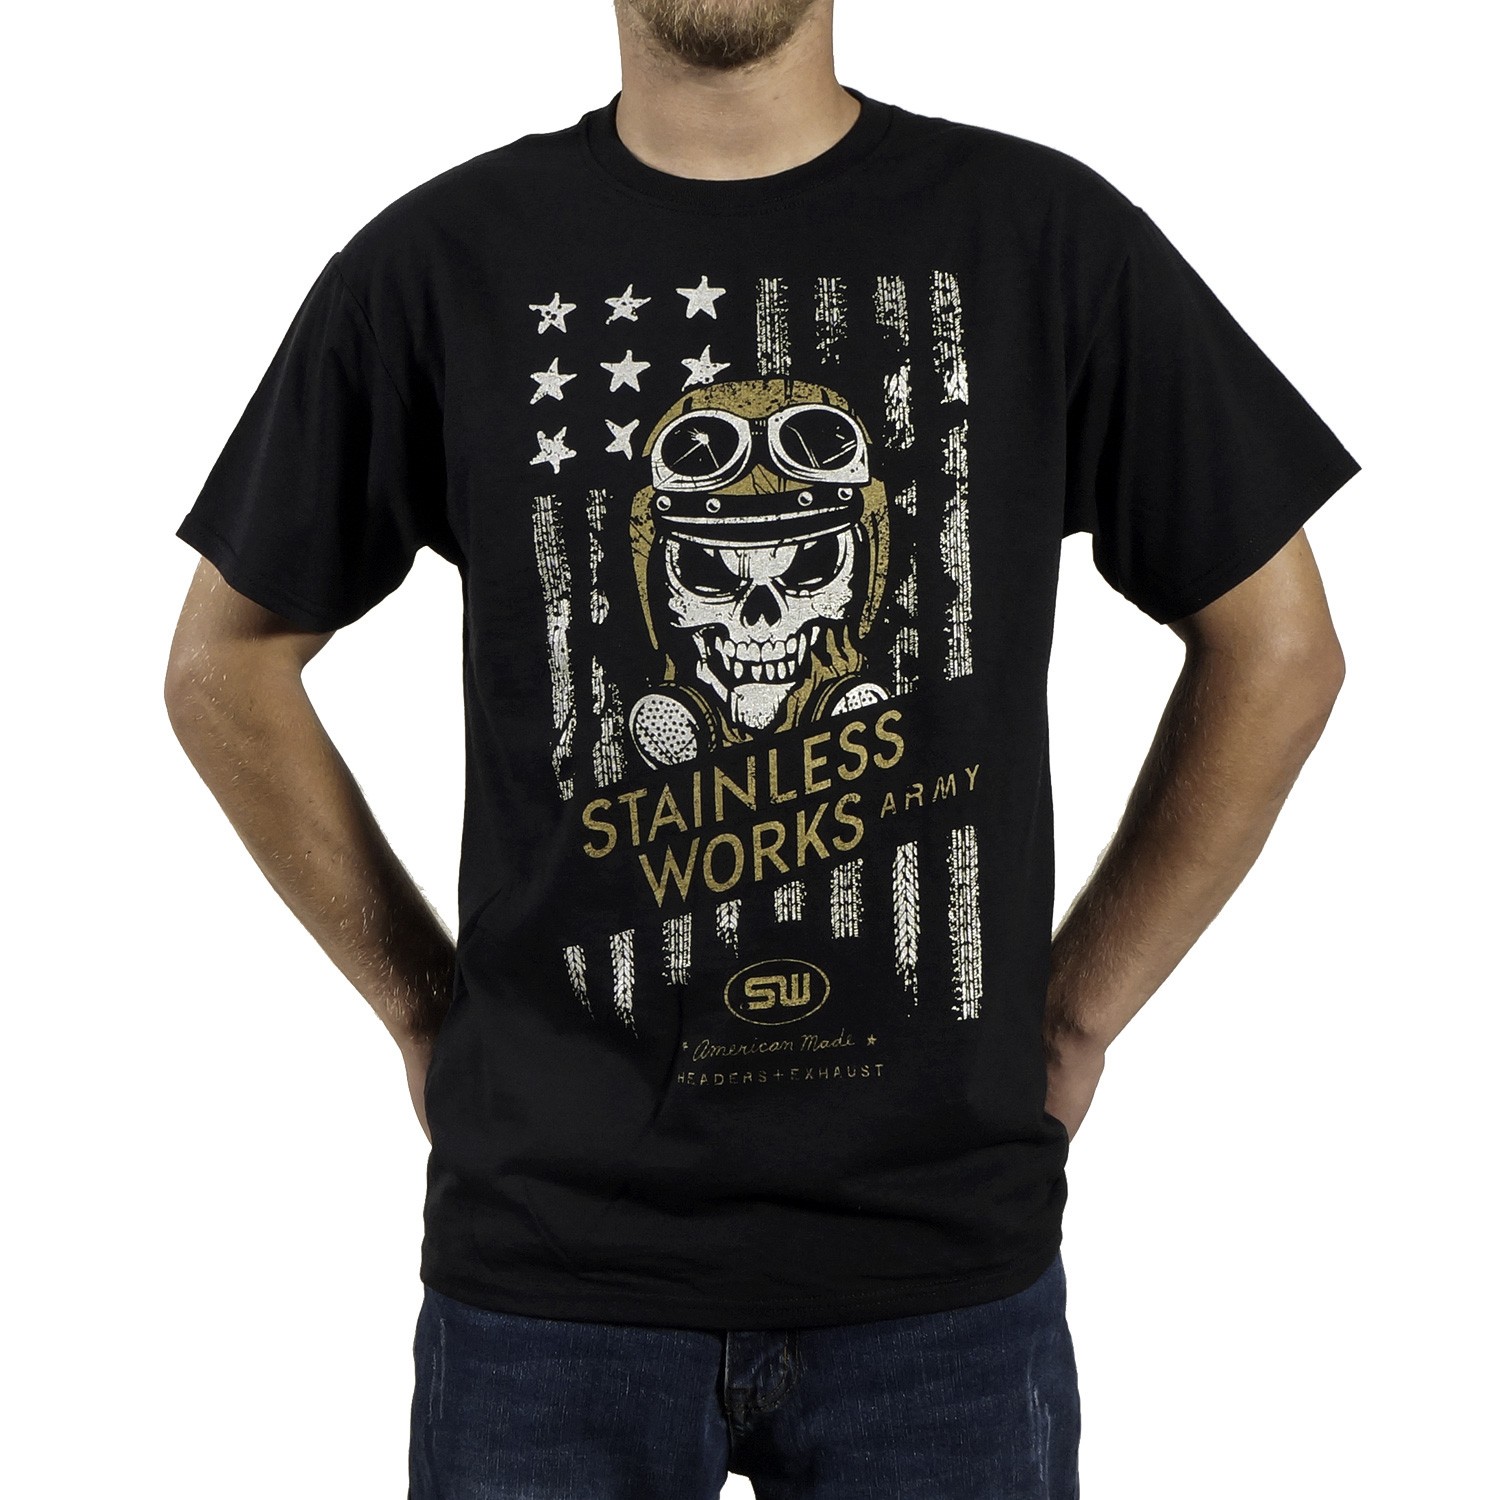 Stainless Works Army T-Shirt USA Flag